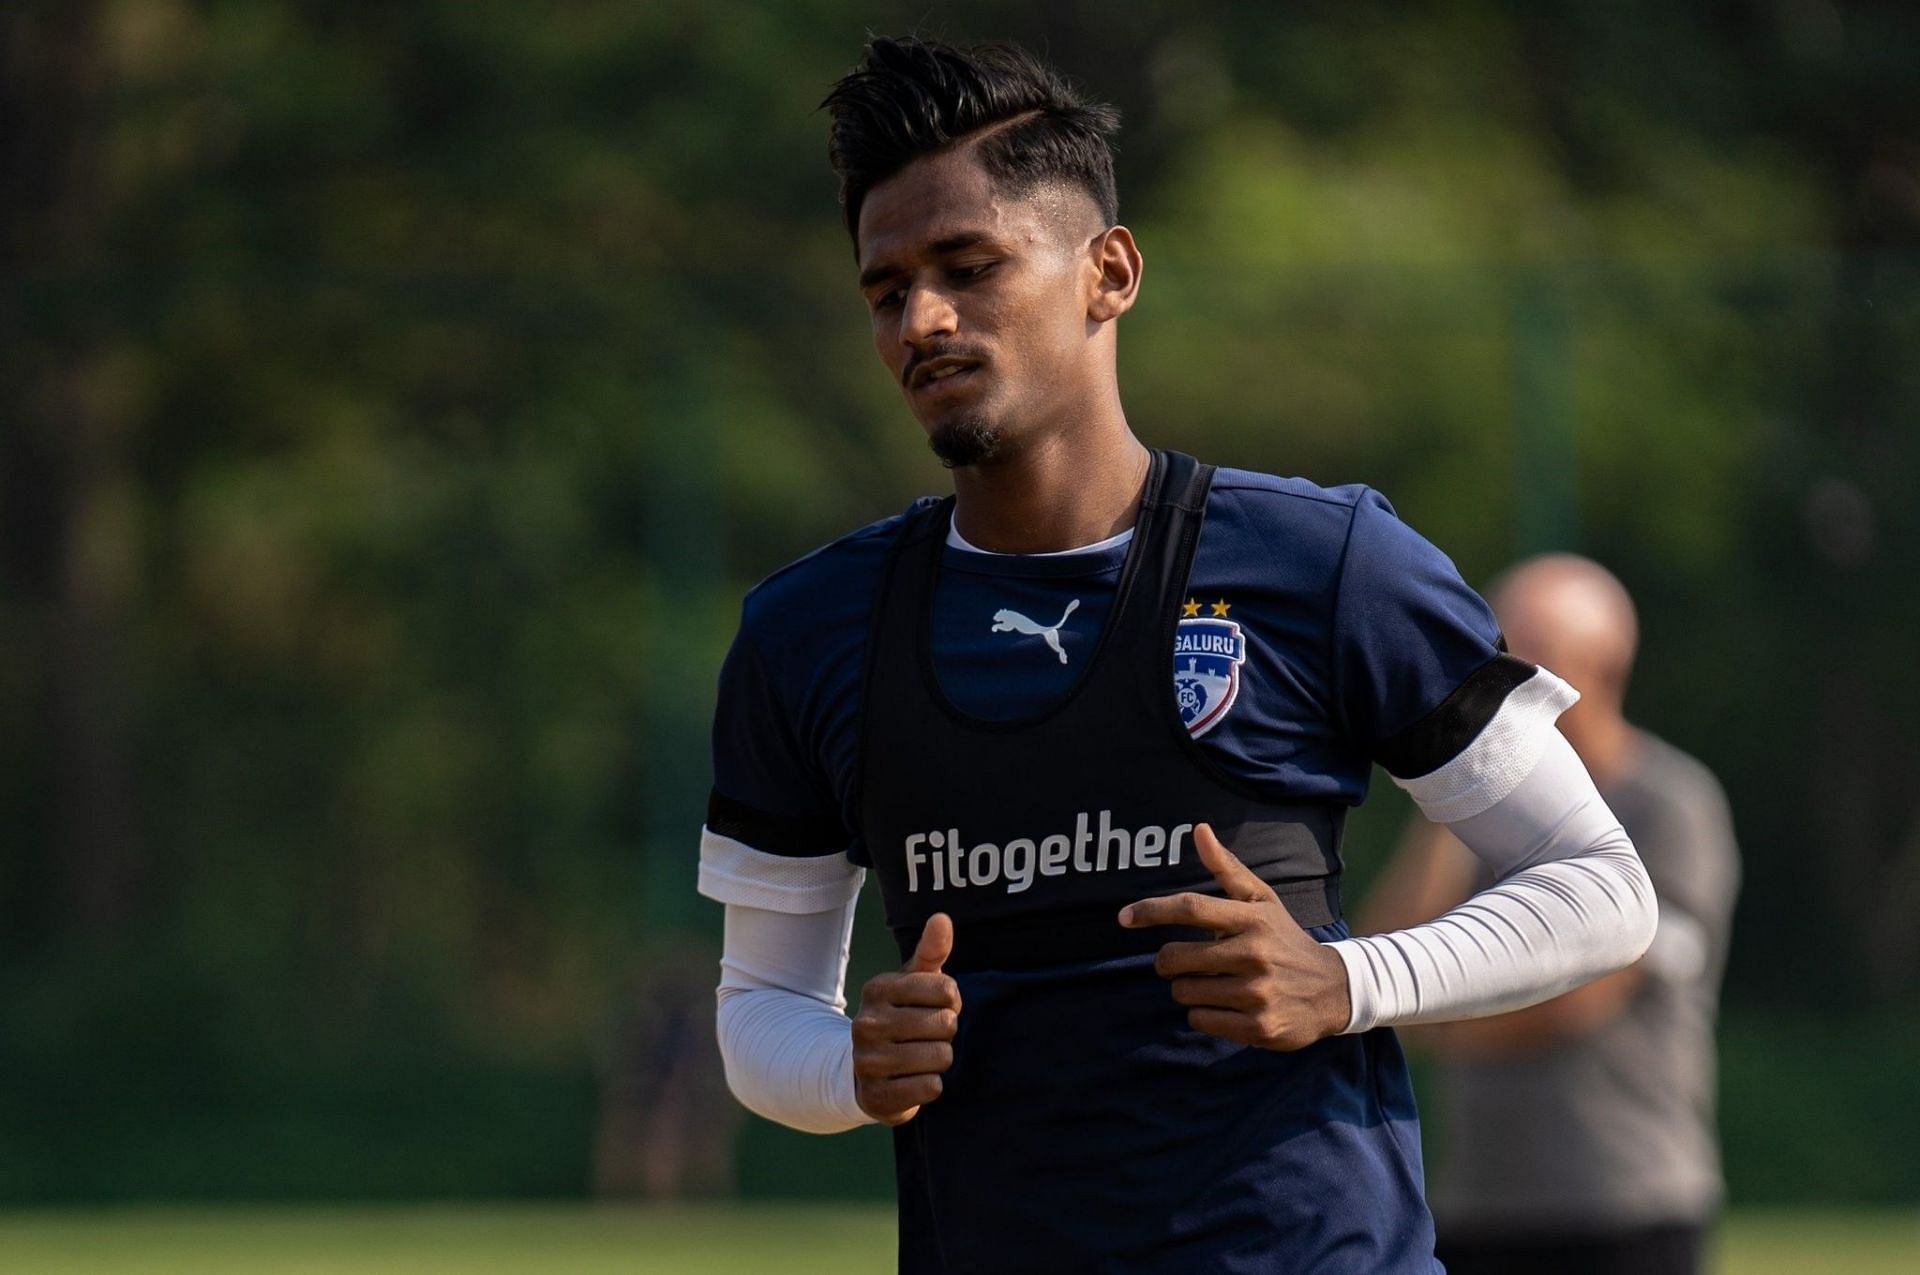 Robin Yadav made his ISL debut for Bengaluru FC against East Bengal earlier in the season.